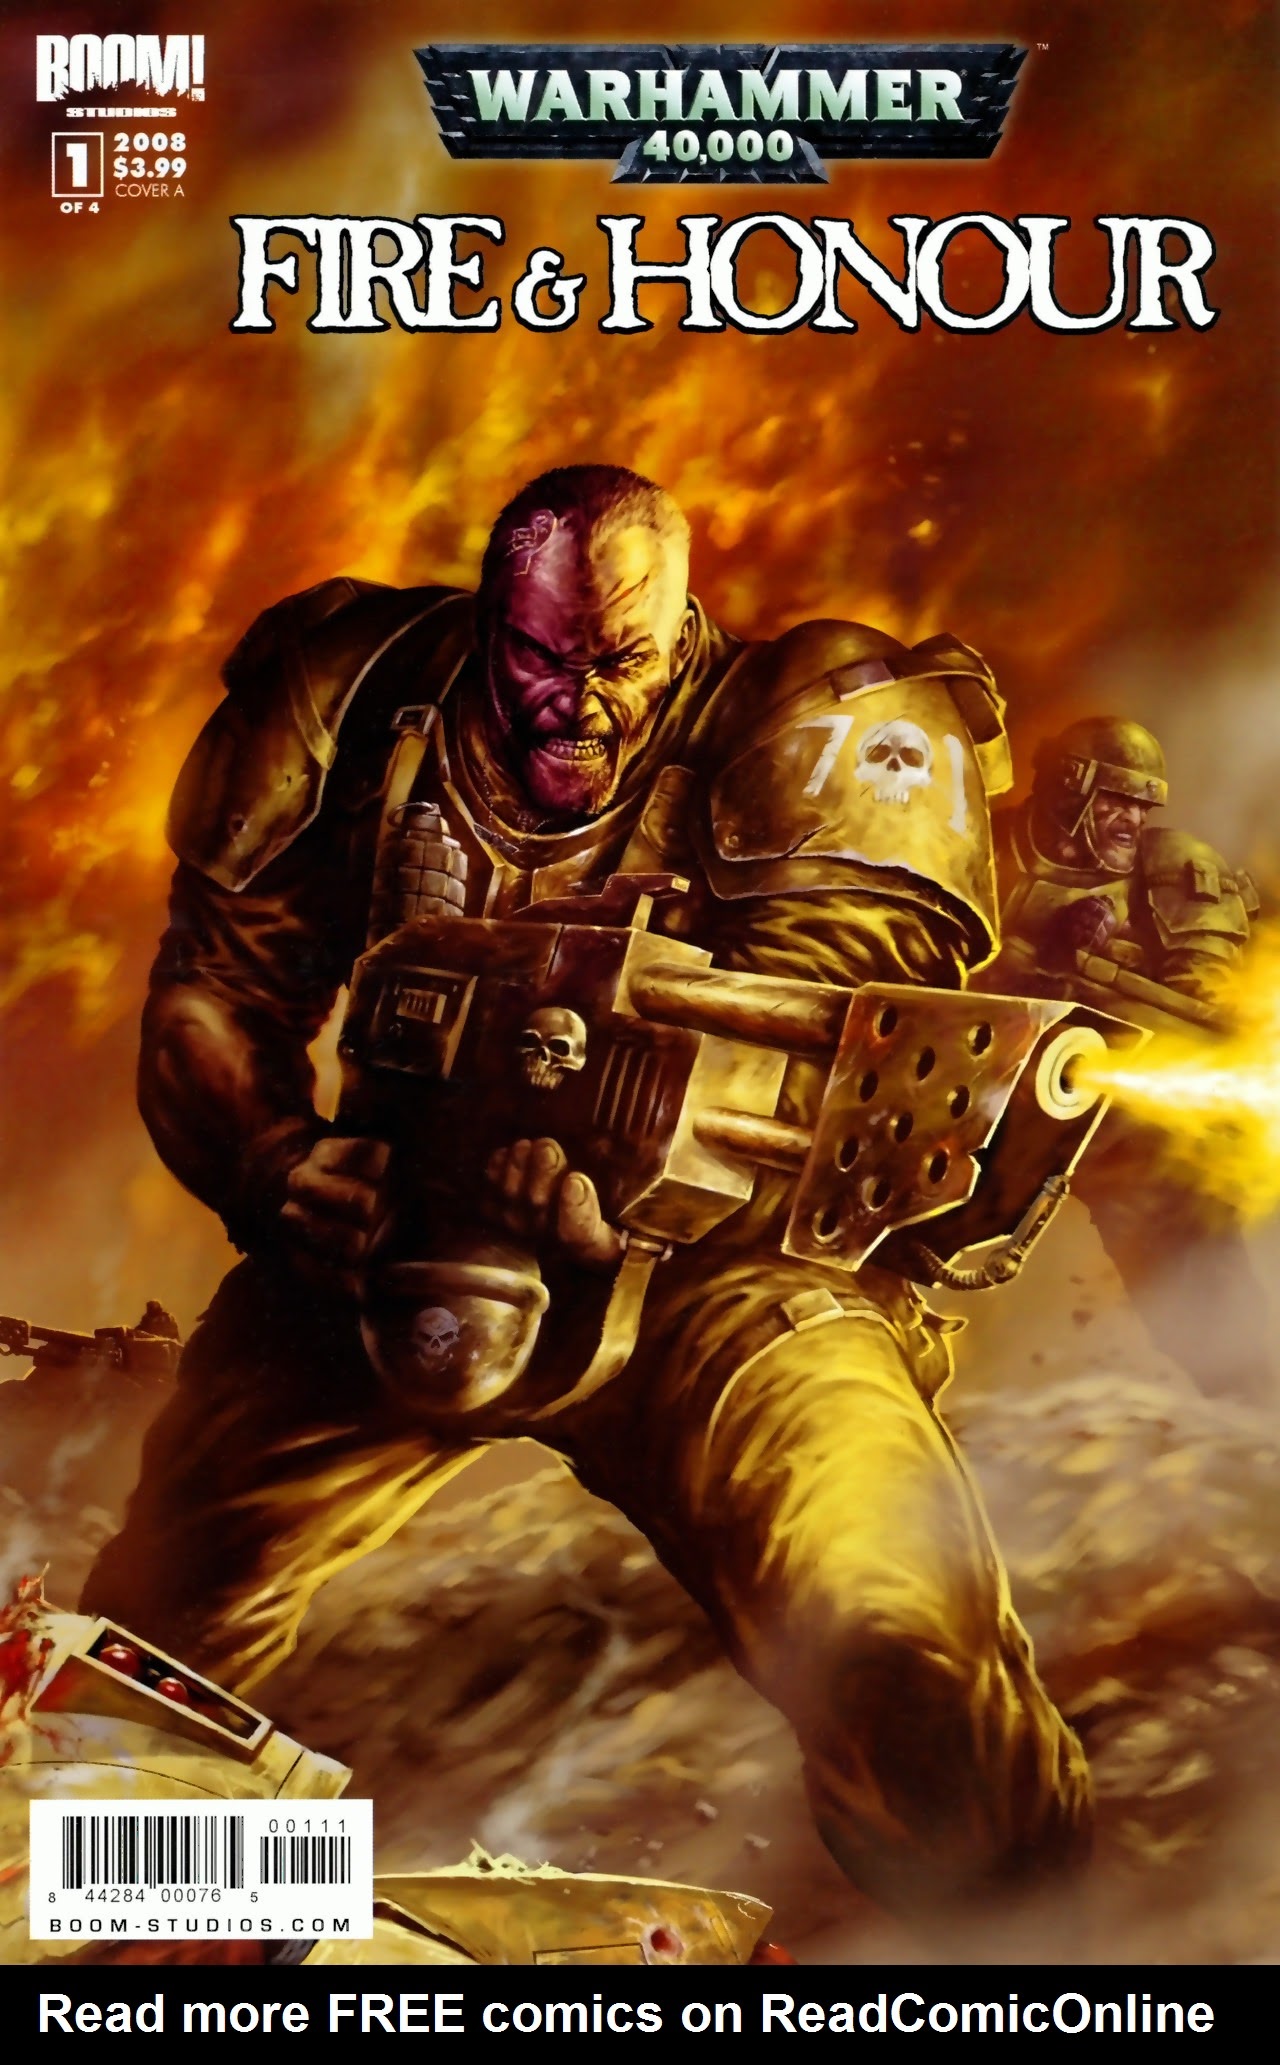 Read online Warhammer 40,000: Fire & Honour comic -  Issue #1 - 1